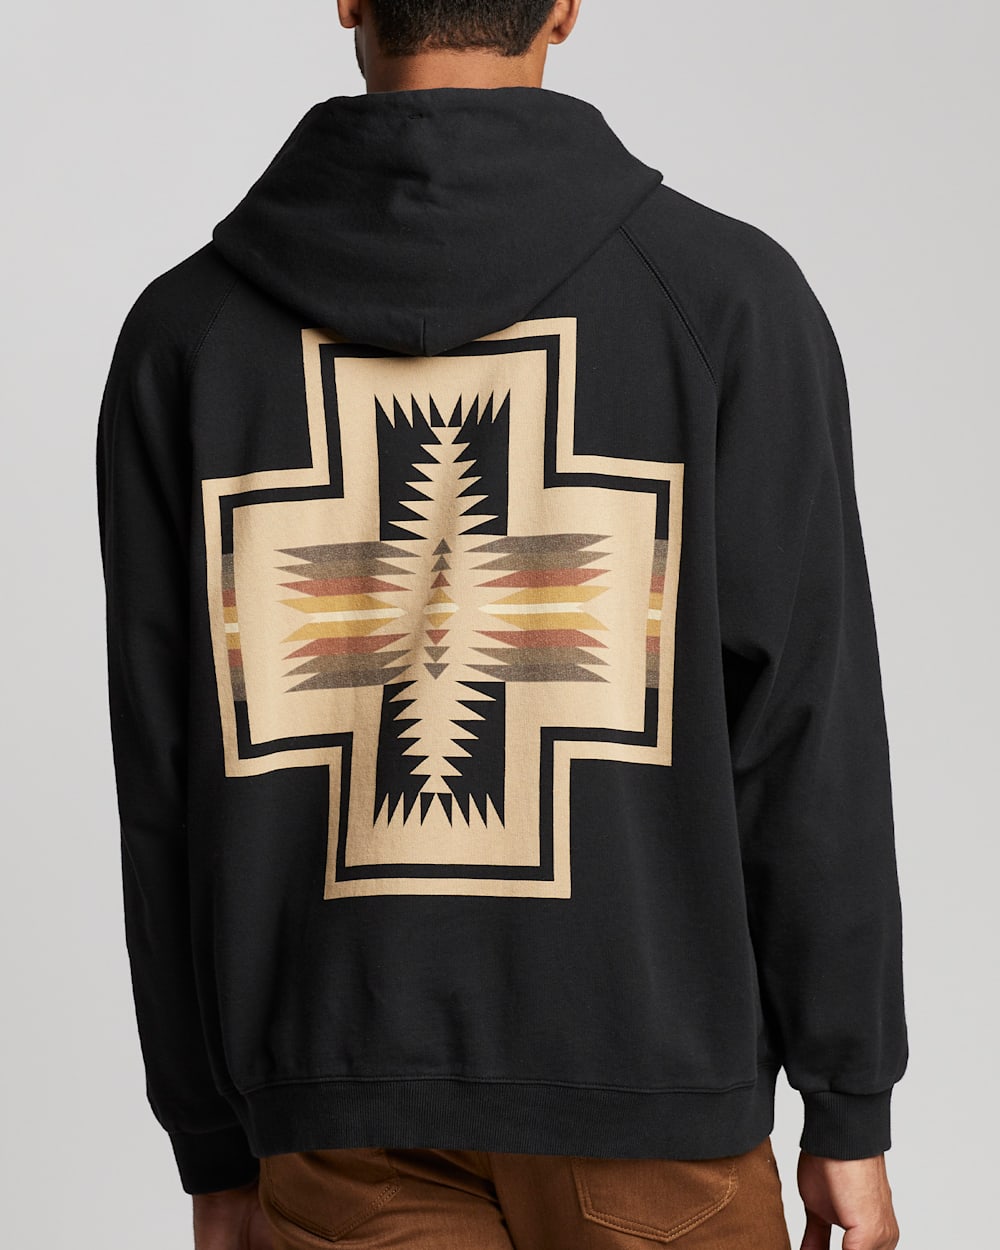 ALTERNATE VIEW OF LIMITED EDITION HOODIE IN BLACK HARDING image number 3